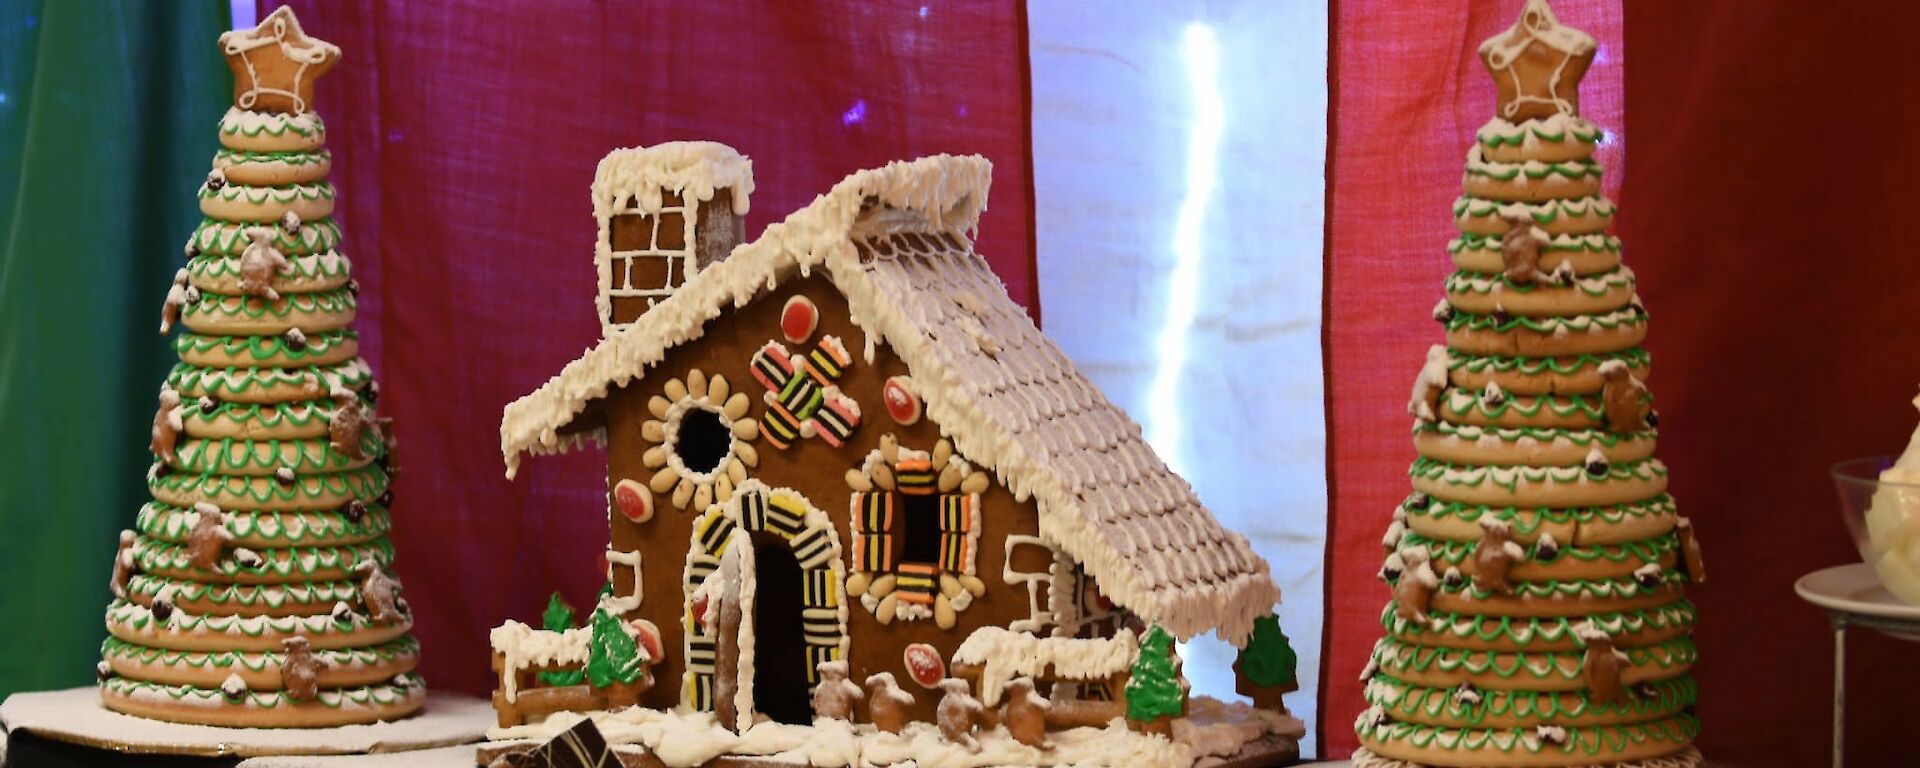 Gingerbread house complete with large gingerbread trees